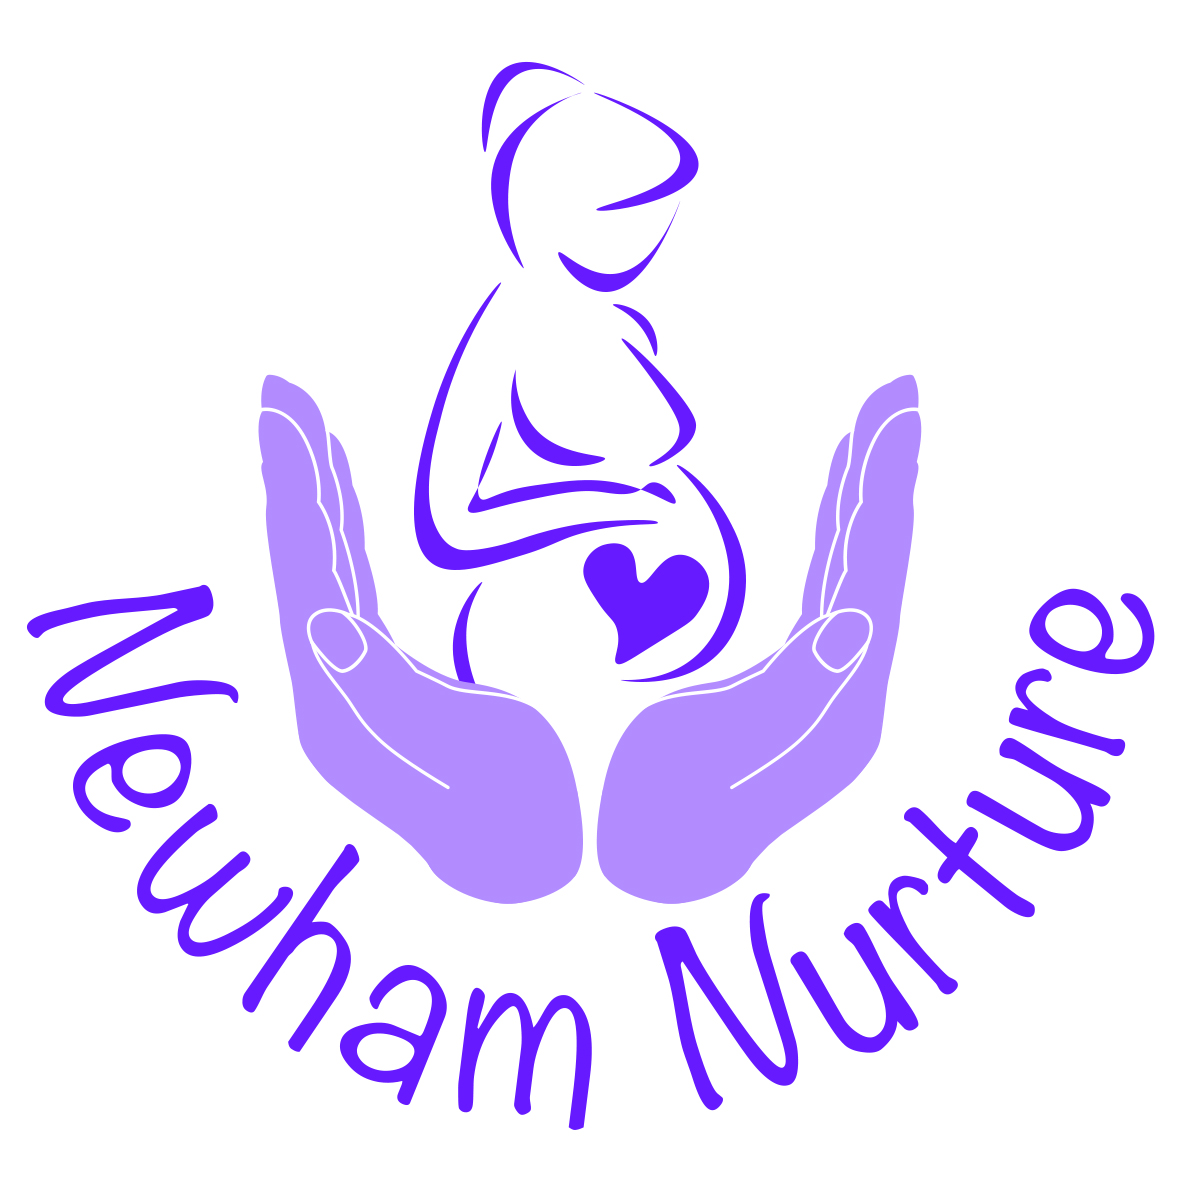 We have extended the deadline for our perinatal partnership project #NewhamNurture, looking for a passionate, skilled Family Support Coordinator 28-35 hours/wk. Is this you?💜 cloudonlinerecruitment.co.uk/nct/VacancyDet… @alternativesTEL @magpieprojectuk @compostlondon